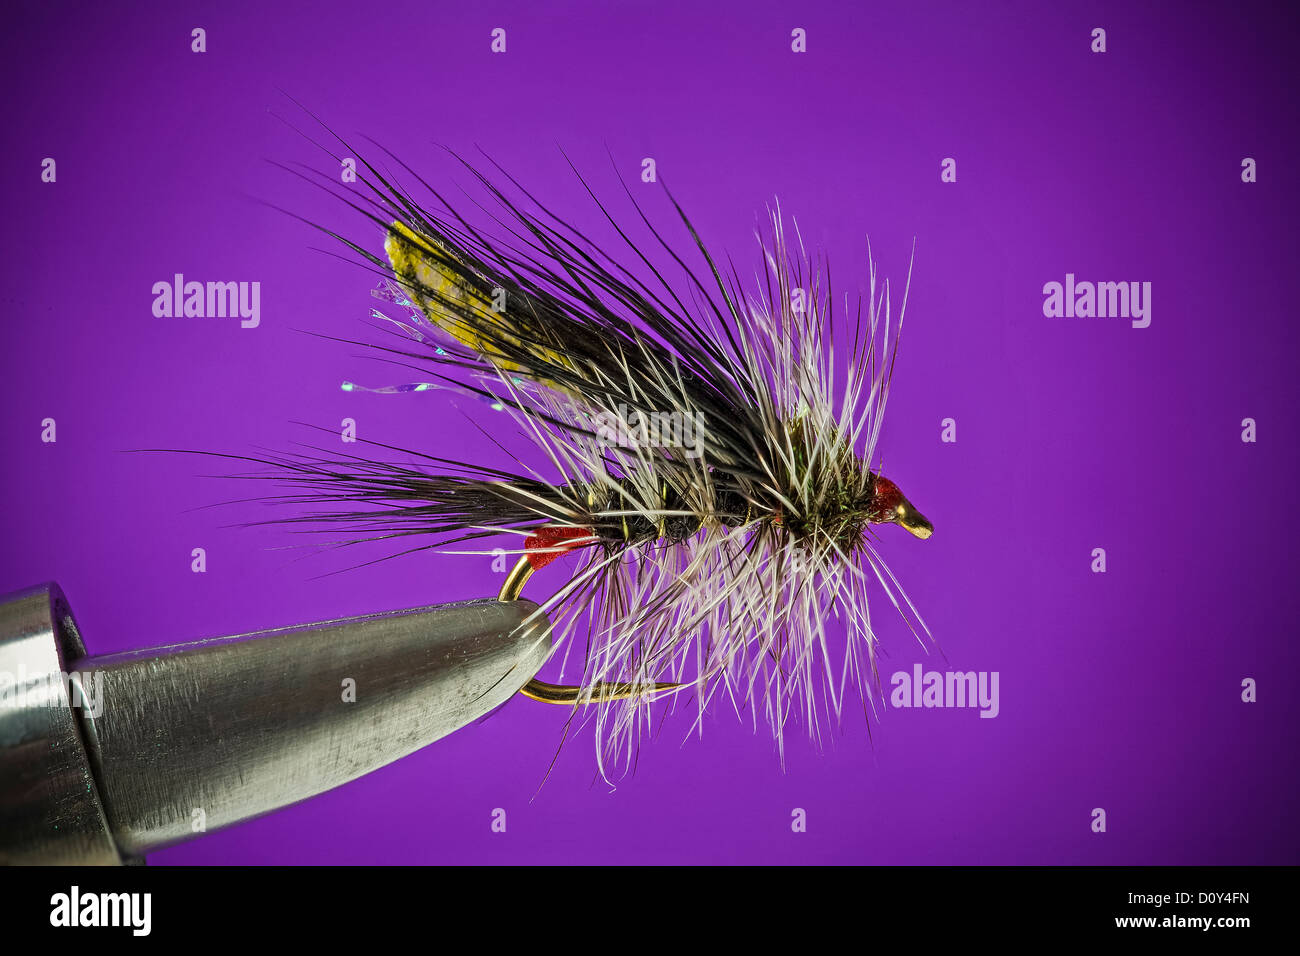 Winged Stimulator fishing fly. Dry Fly for Trout or Salmon Stock